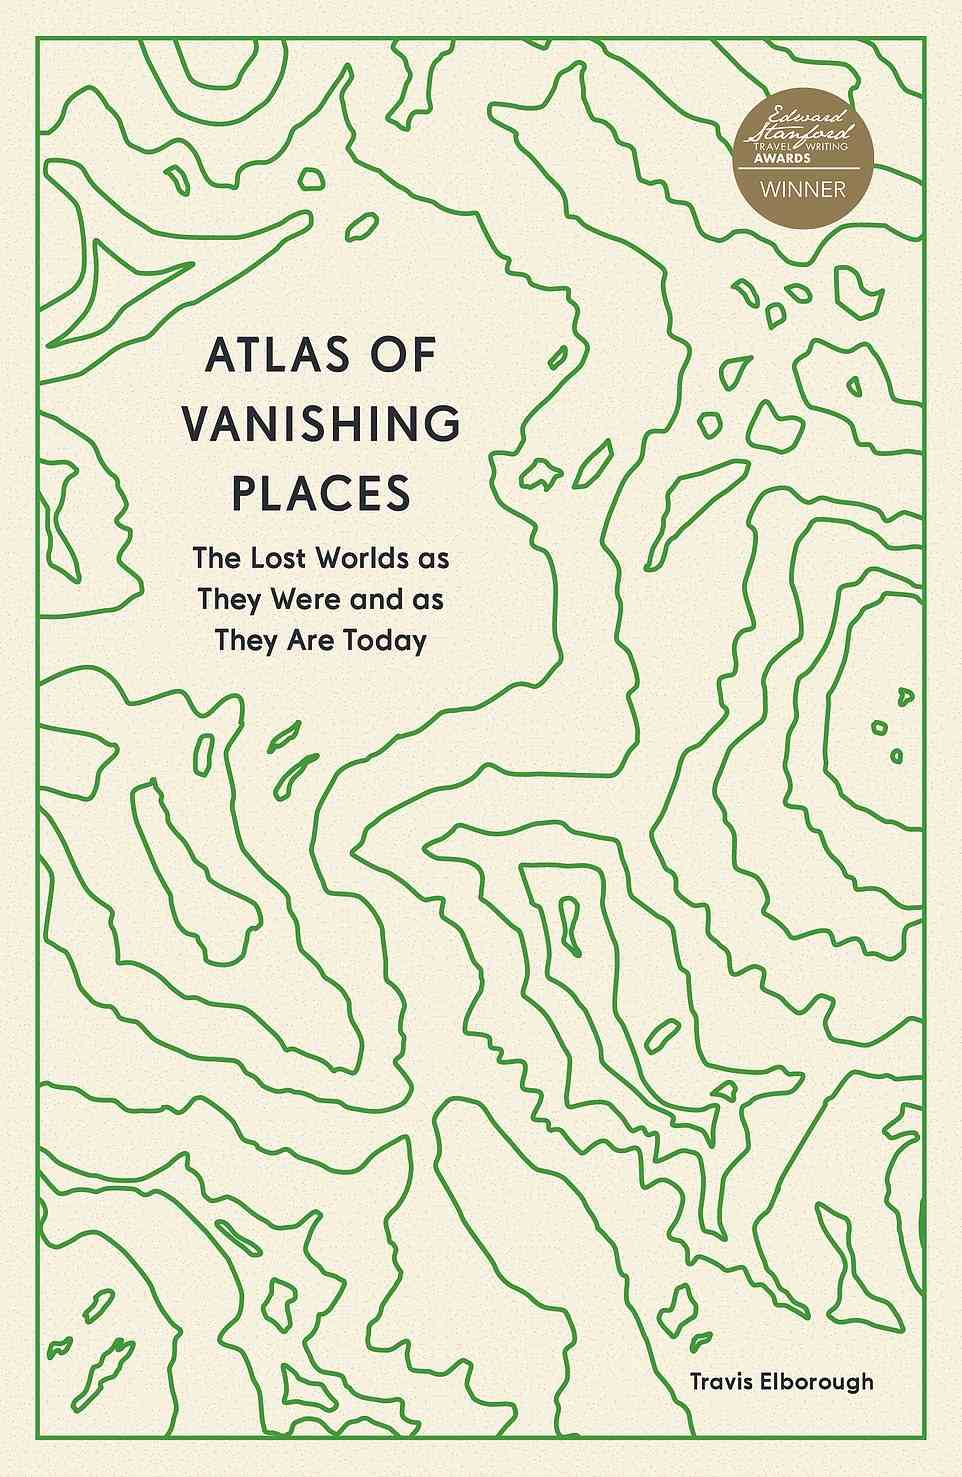 Atlas of Vanishing Places - The Lost Worlds As They Were And As They Are Today, by Travis Elborough and with maps by Martin Brown, is out now (£9.99, Aurum Press)